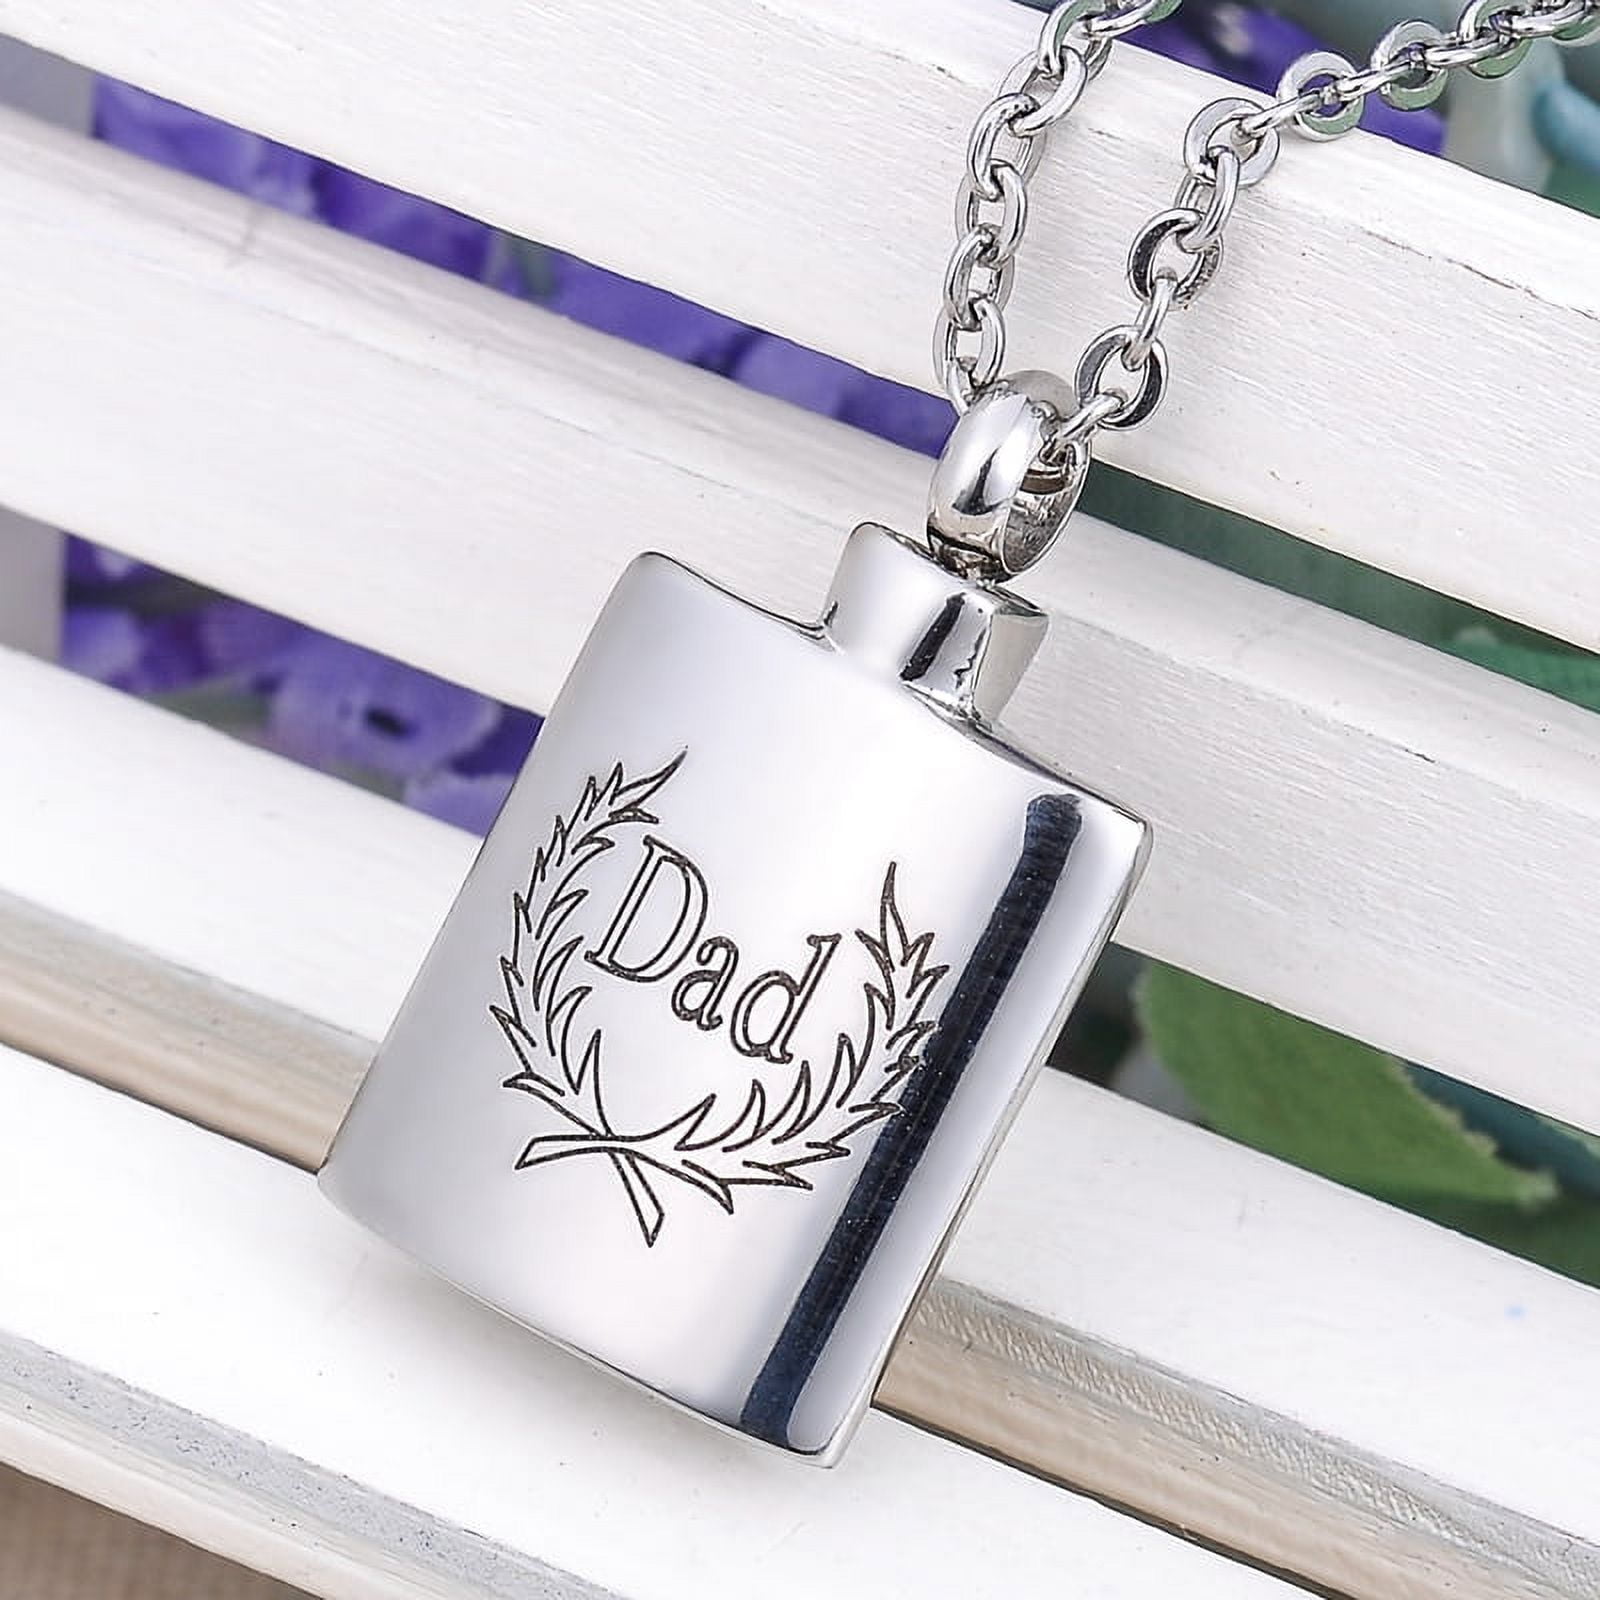 Dad Flask Cremation Jewelry Keepsake Memorial Ashes Urn Pendant Necklace for friend family pet 29b776c0 1ccb 4535 8254 5855ca6ca8e4.51f06e3467c992ede1d097b3c2ba3b96